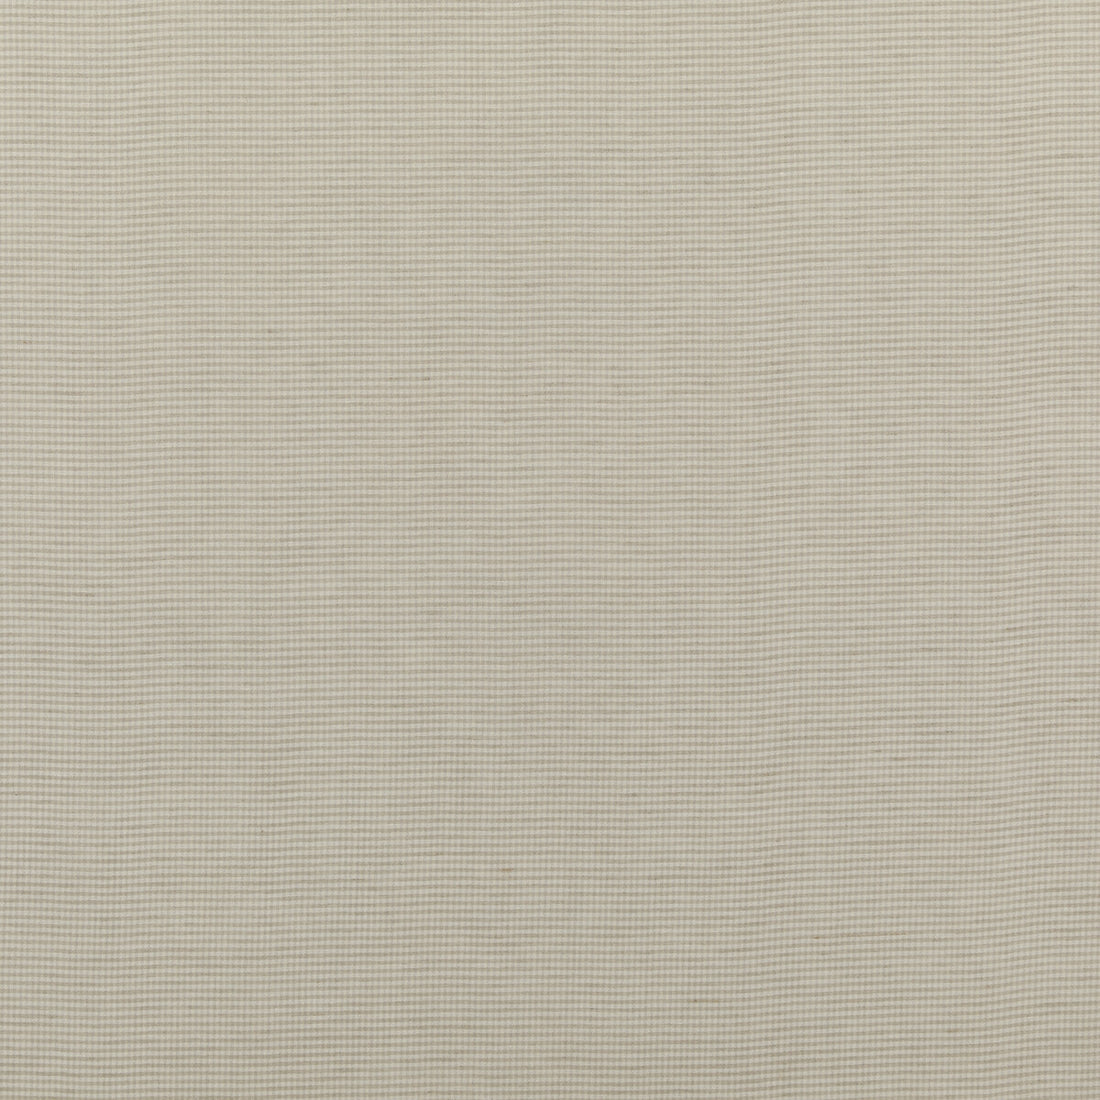 Adair fabric in parchment color - pattern FD778.J107.0 - by Mulberry in the Modern Country collection